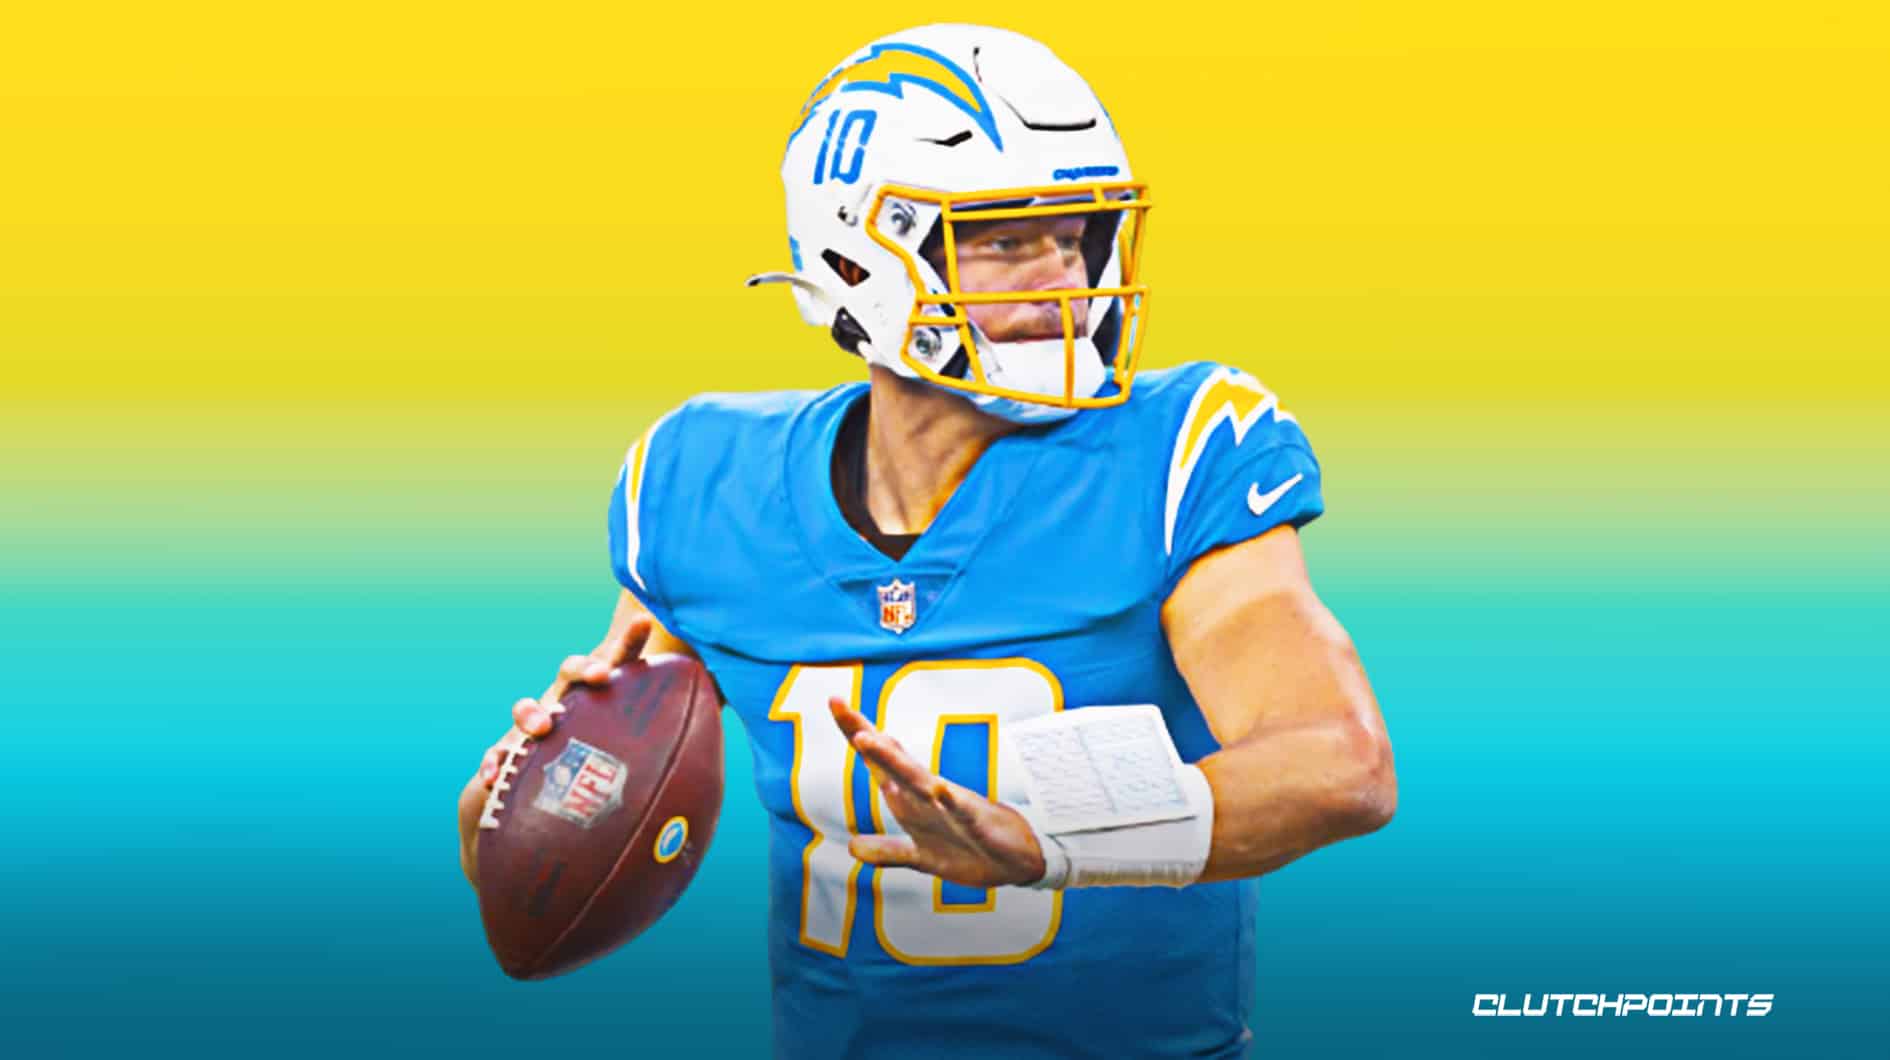 Chargers news: What Justin Herbert wants to 'master' after big rookie year